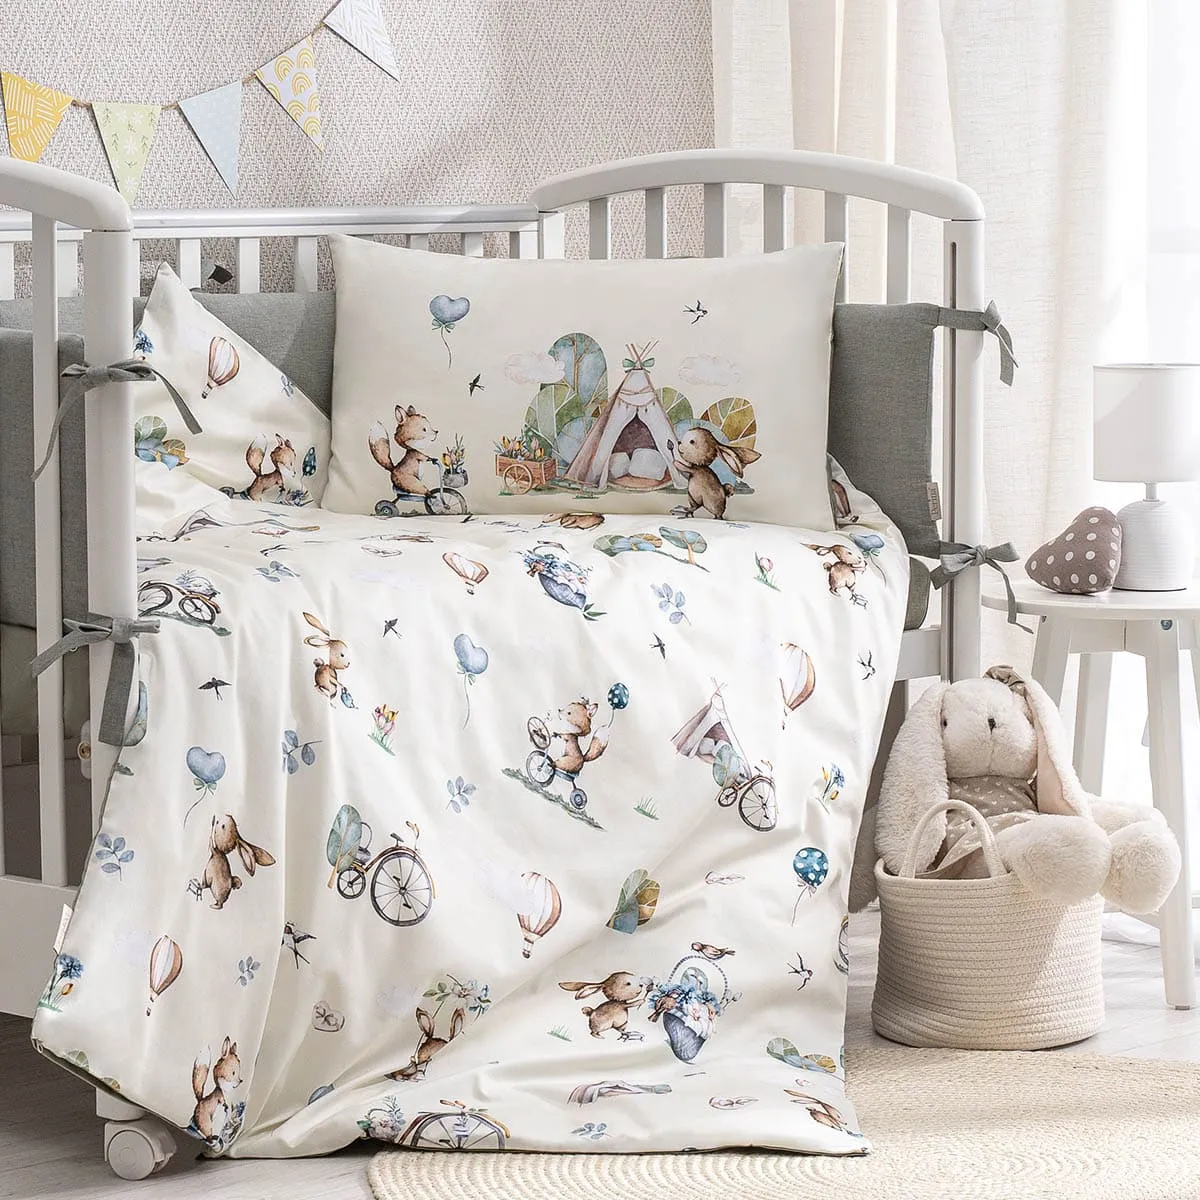 Category Baby linens